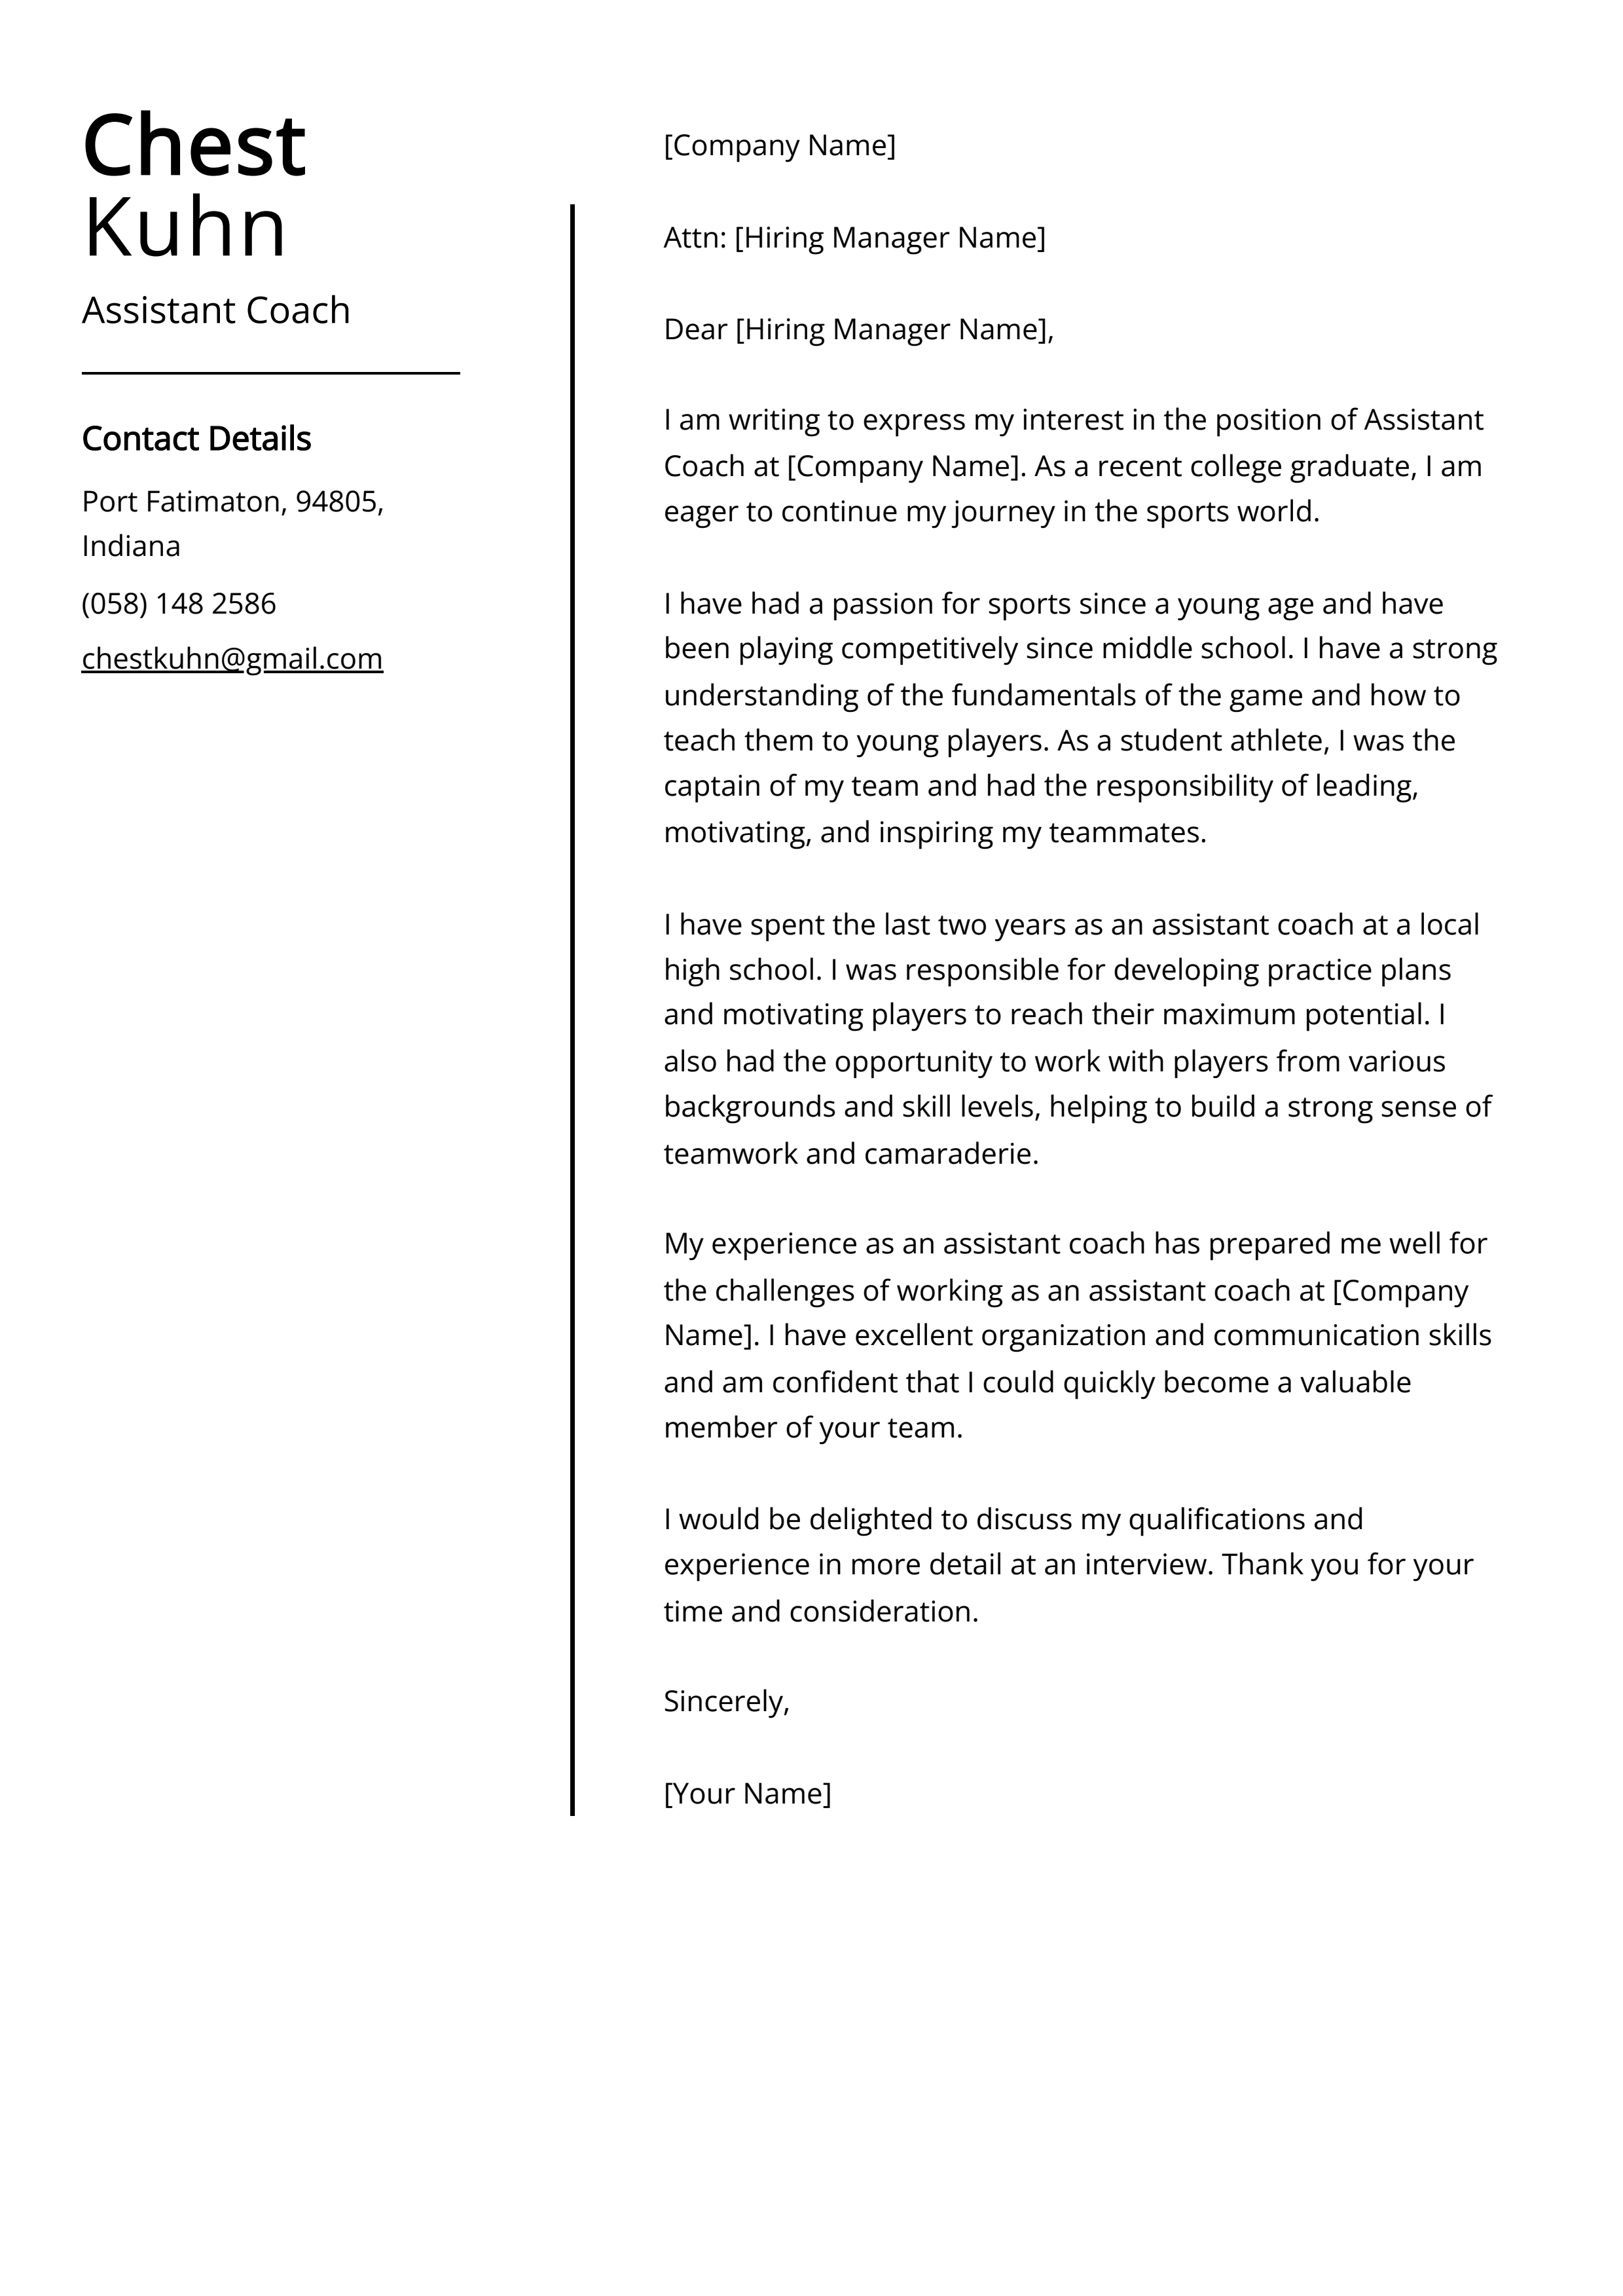 Assistant Coach Cover Letter Example (Free Guide)